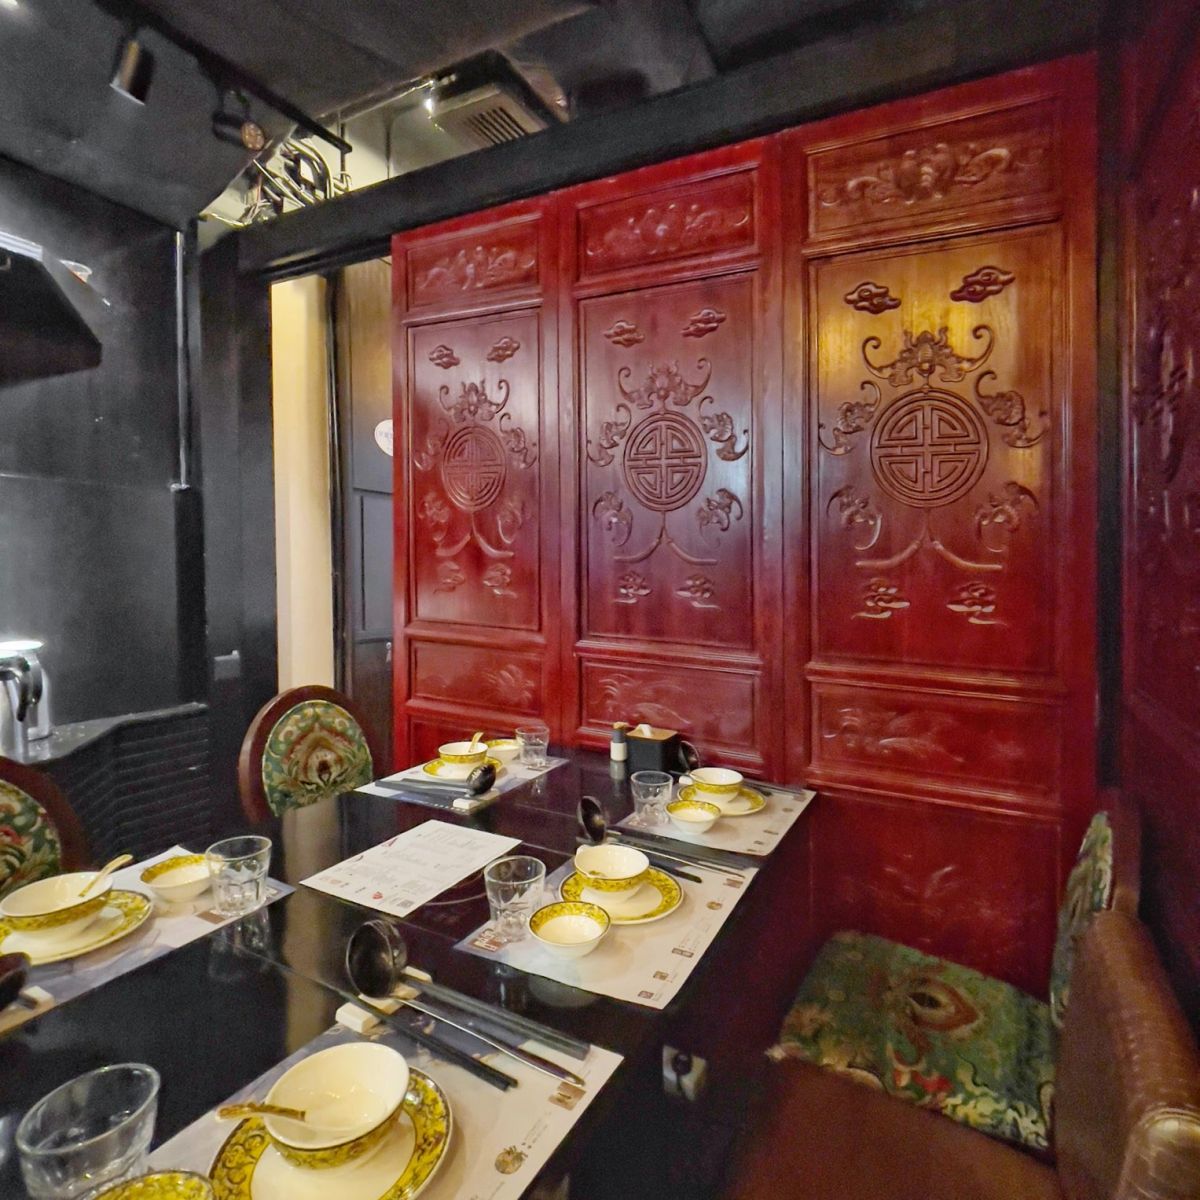 The interior of Wulu takes a modern Chinese decoration